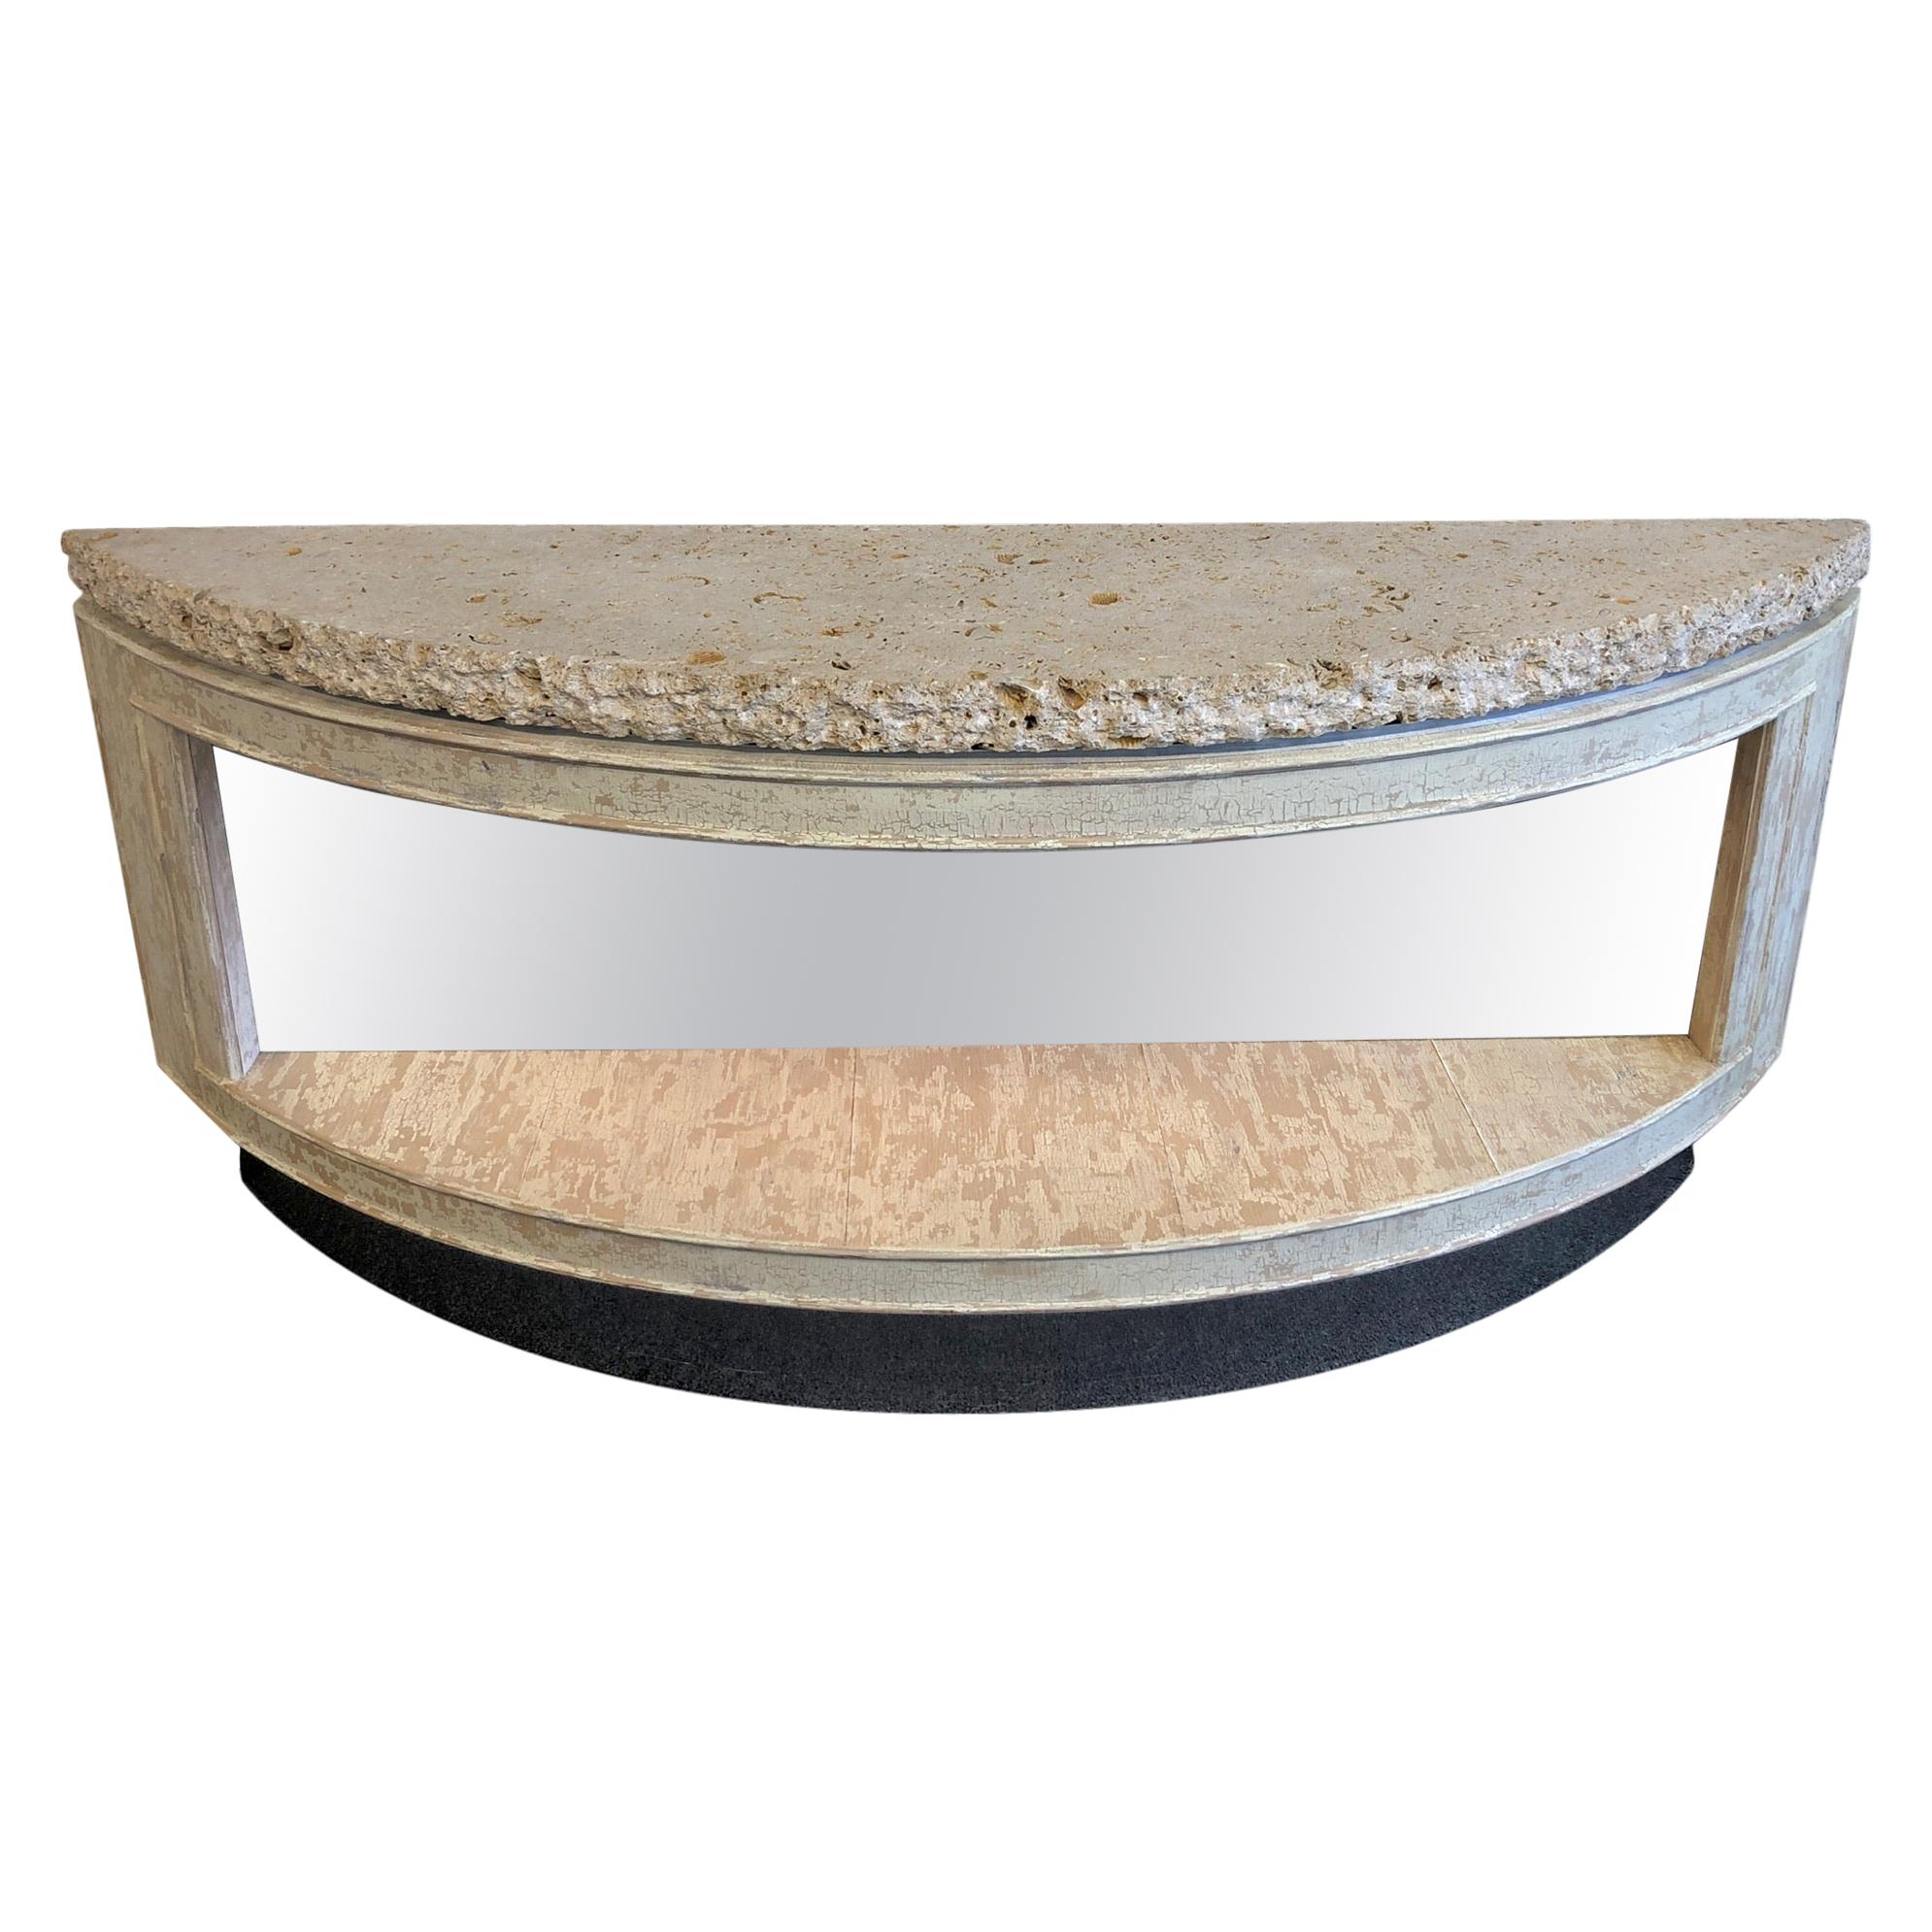 Fossil Shell Stone Top Demilune Two-Tier Console Table by Steve Chase